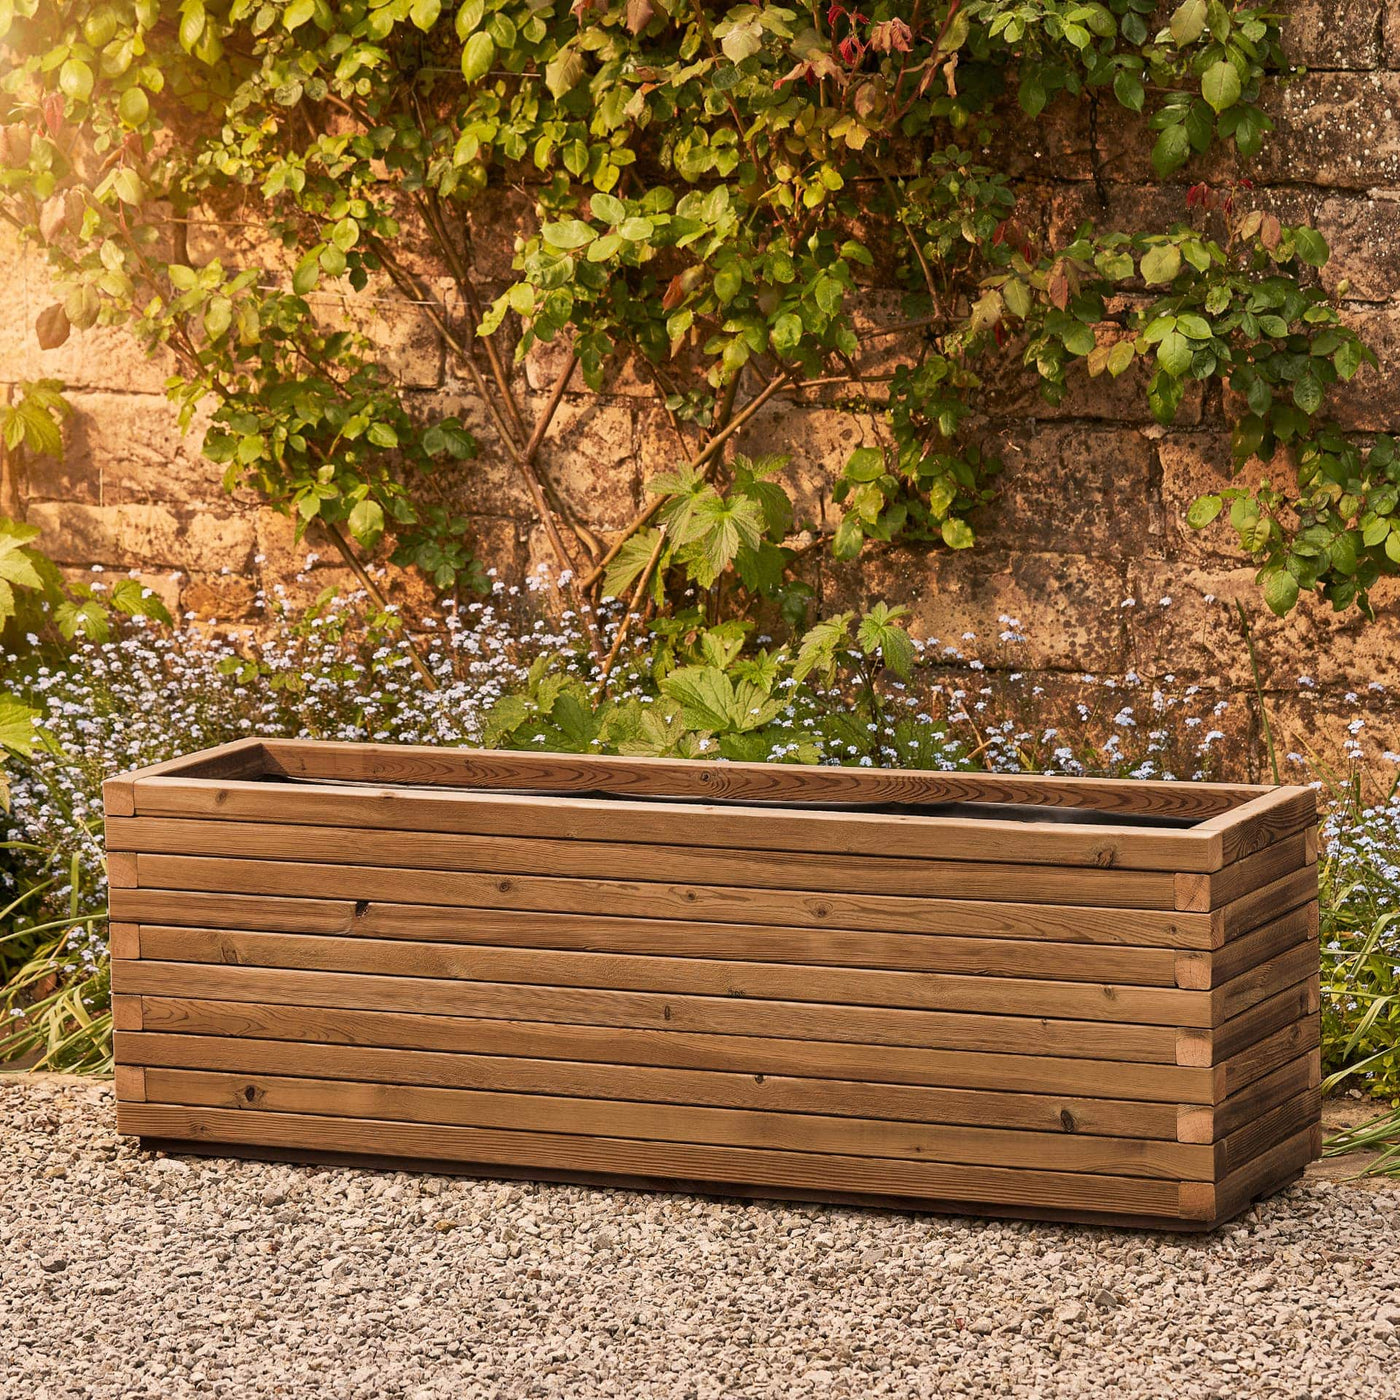 Modern Garden Patio Planter EXTRA LARGE With Optional Castors